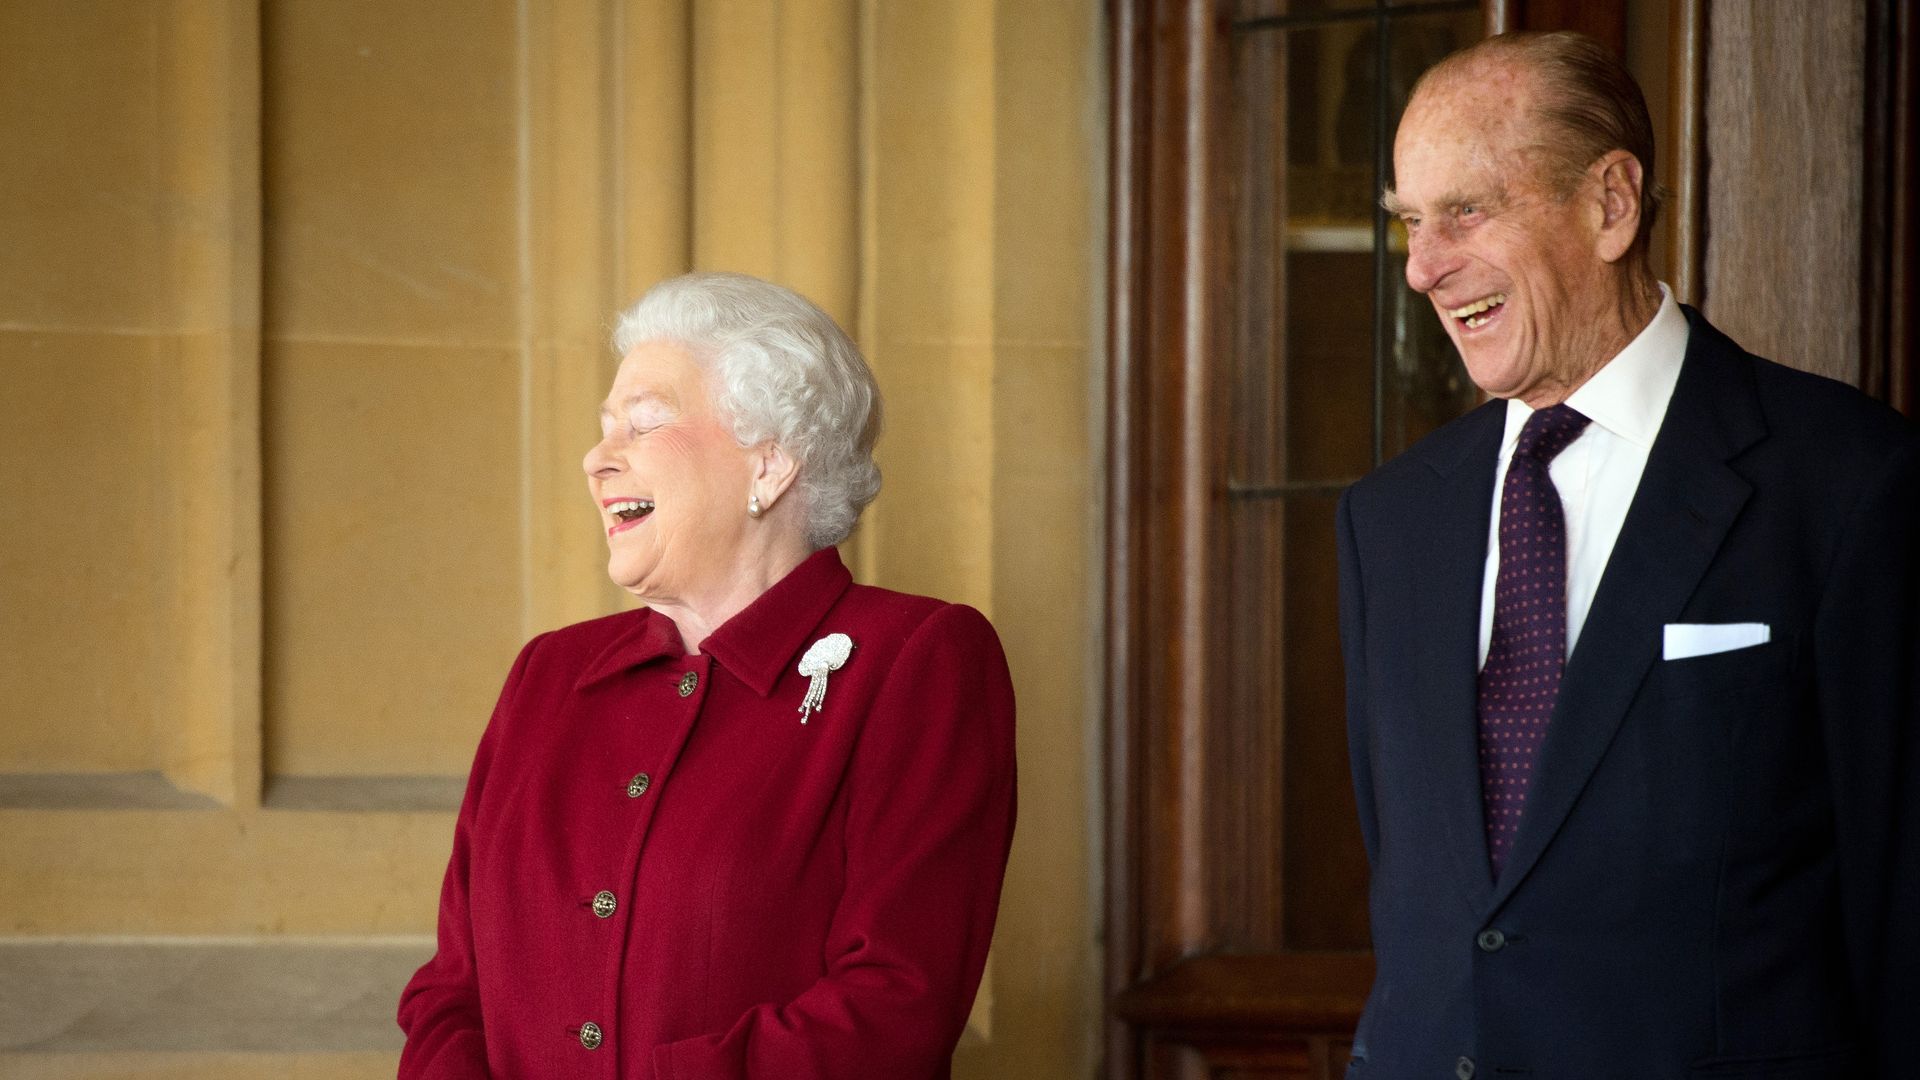 Queen Elizabeth II laughing whilst wearing a red coat and Prince Philip smiling in a blue suit